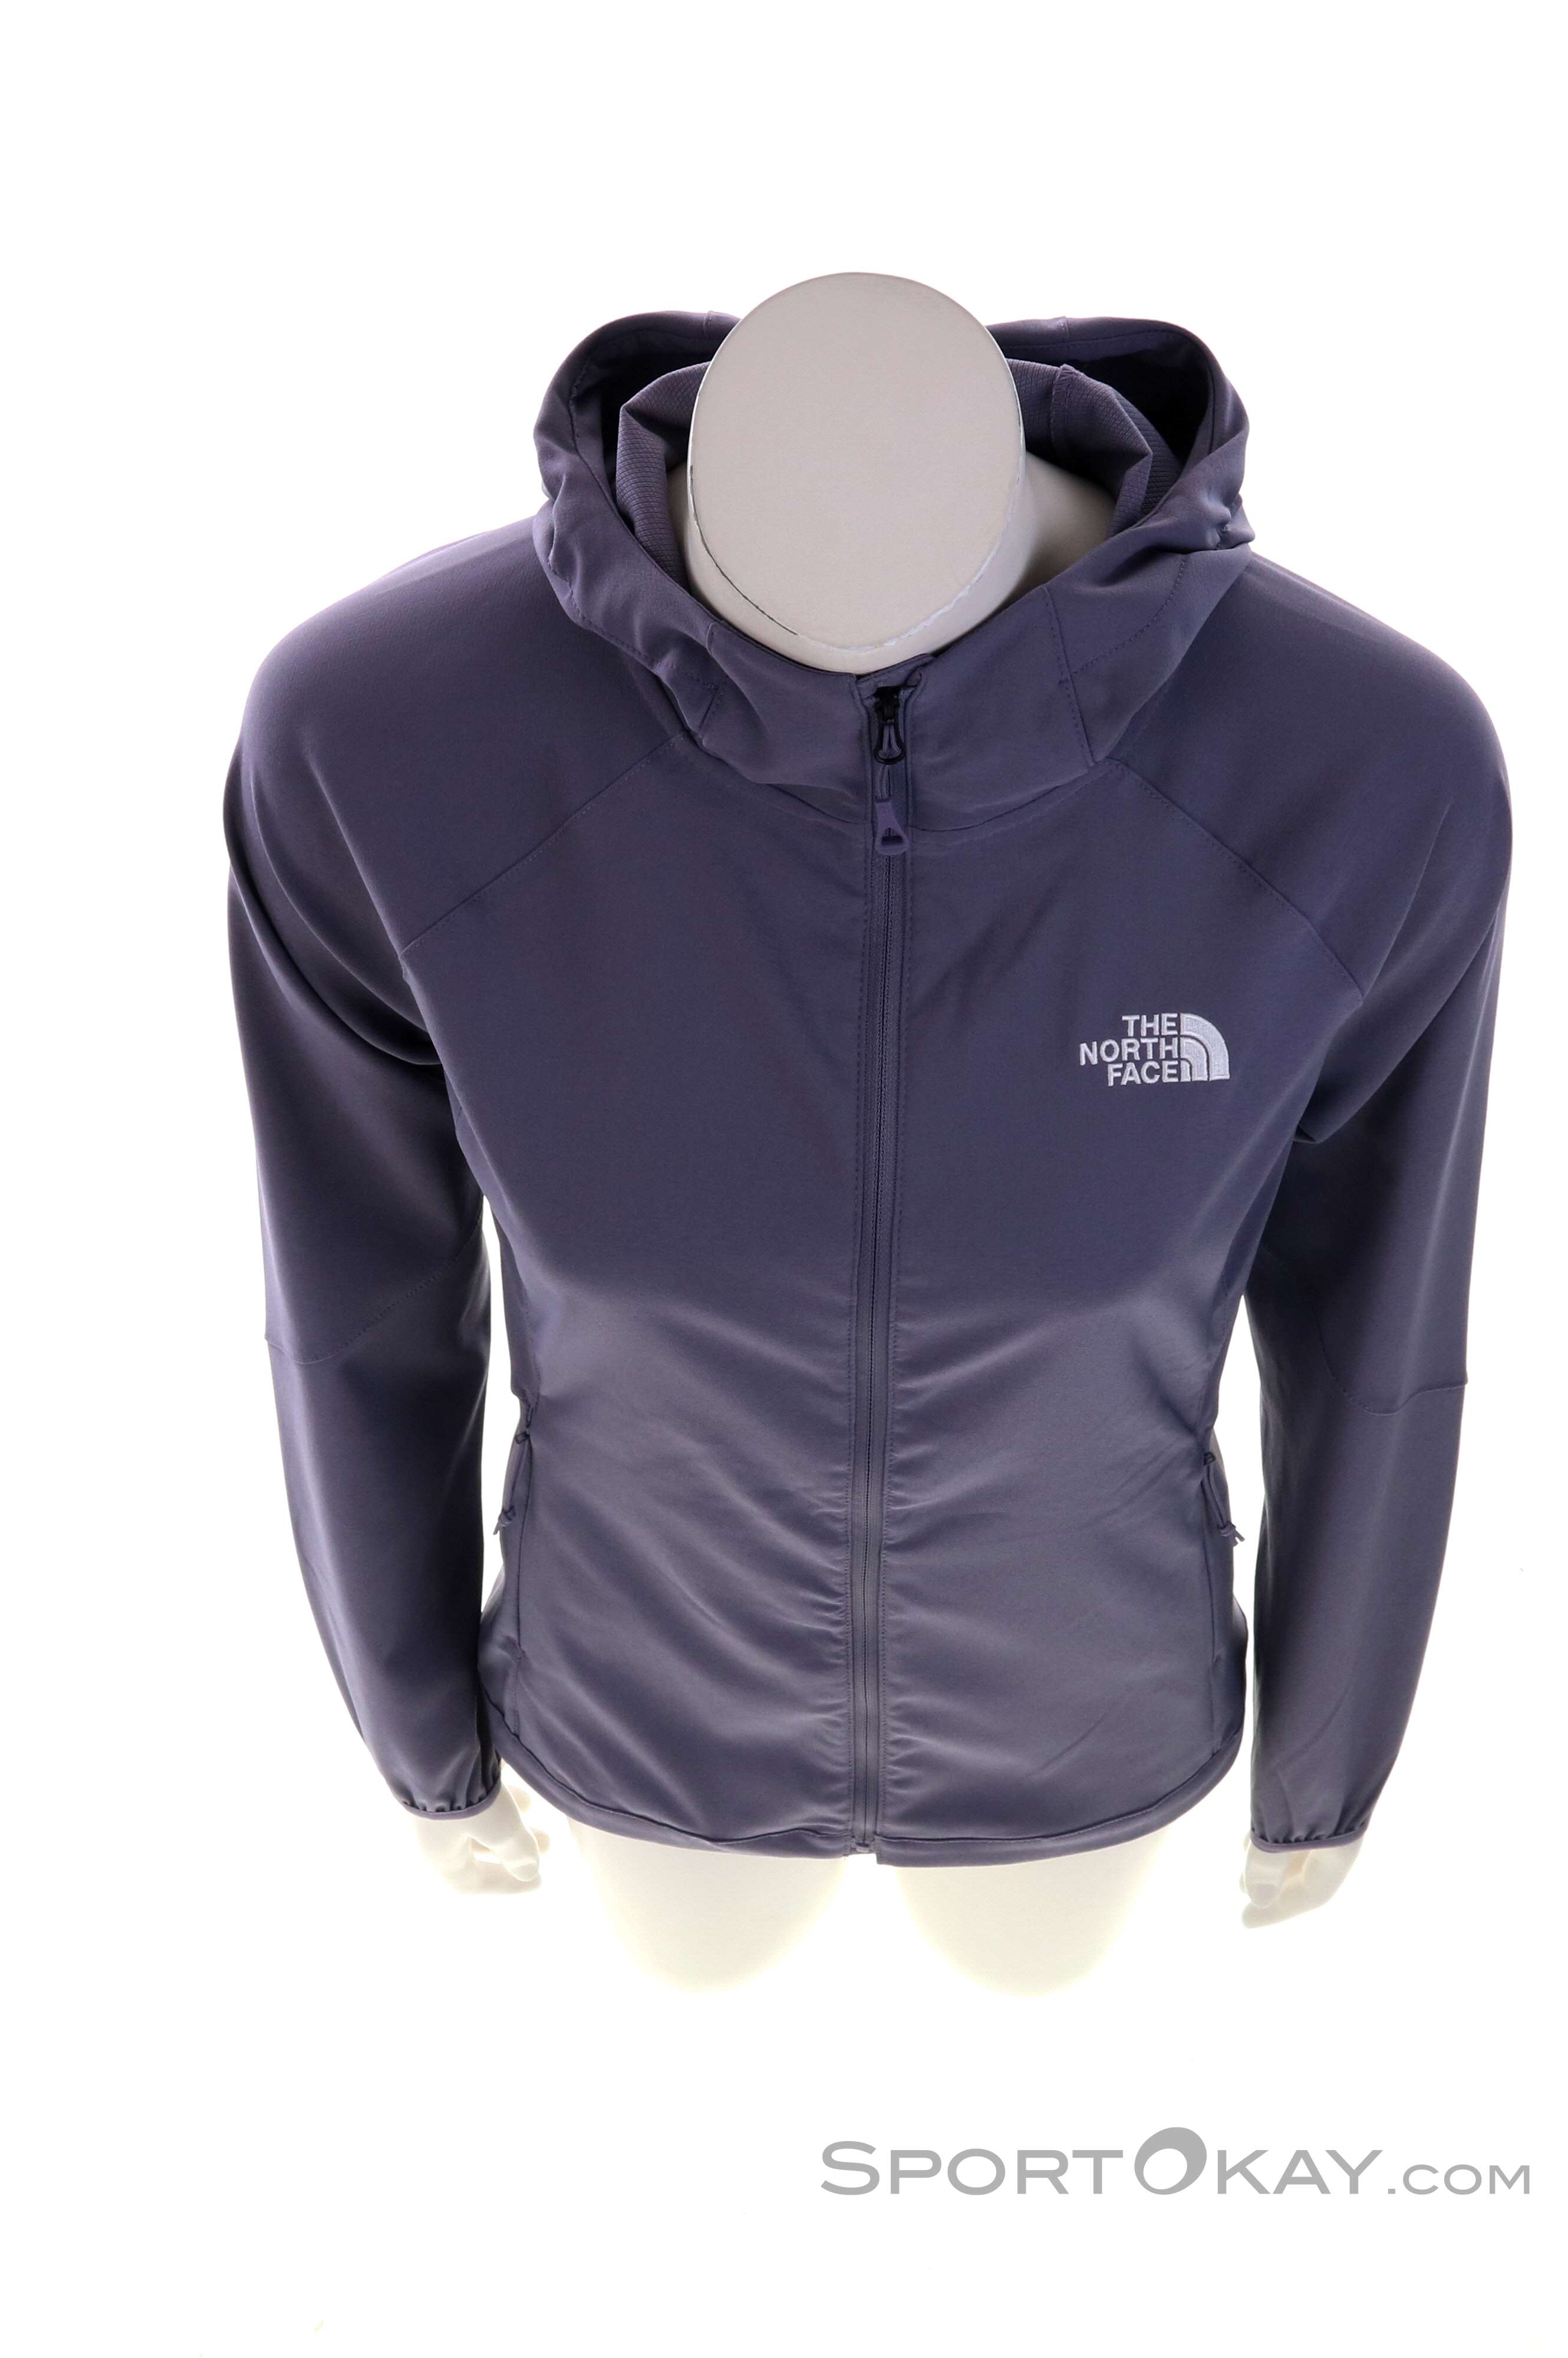 The North Face Apex Nimble - Clothing - Outdoor - Jacket Jackets Women Outdoor All - Outdoor